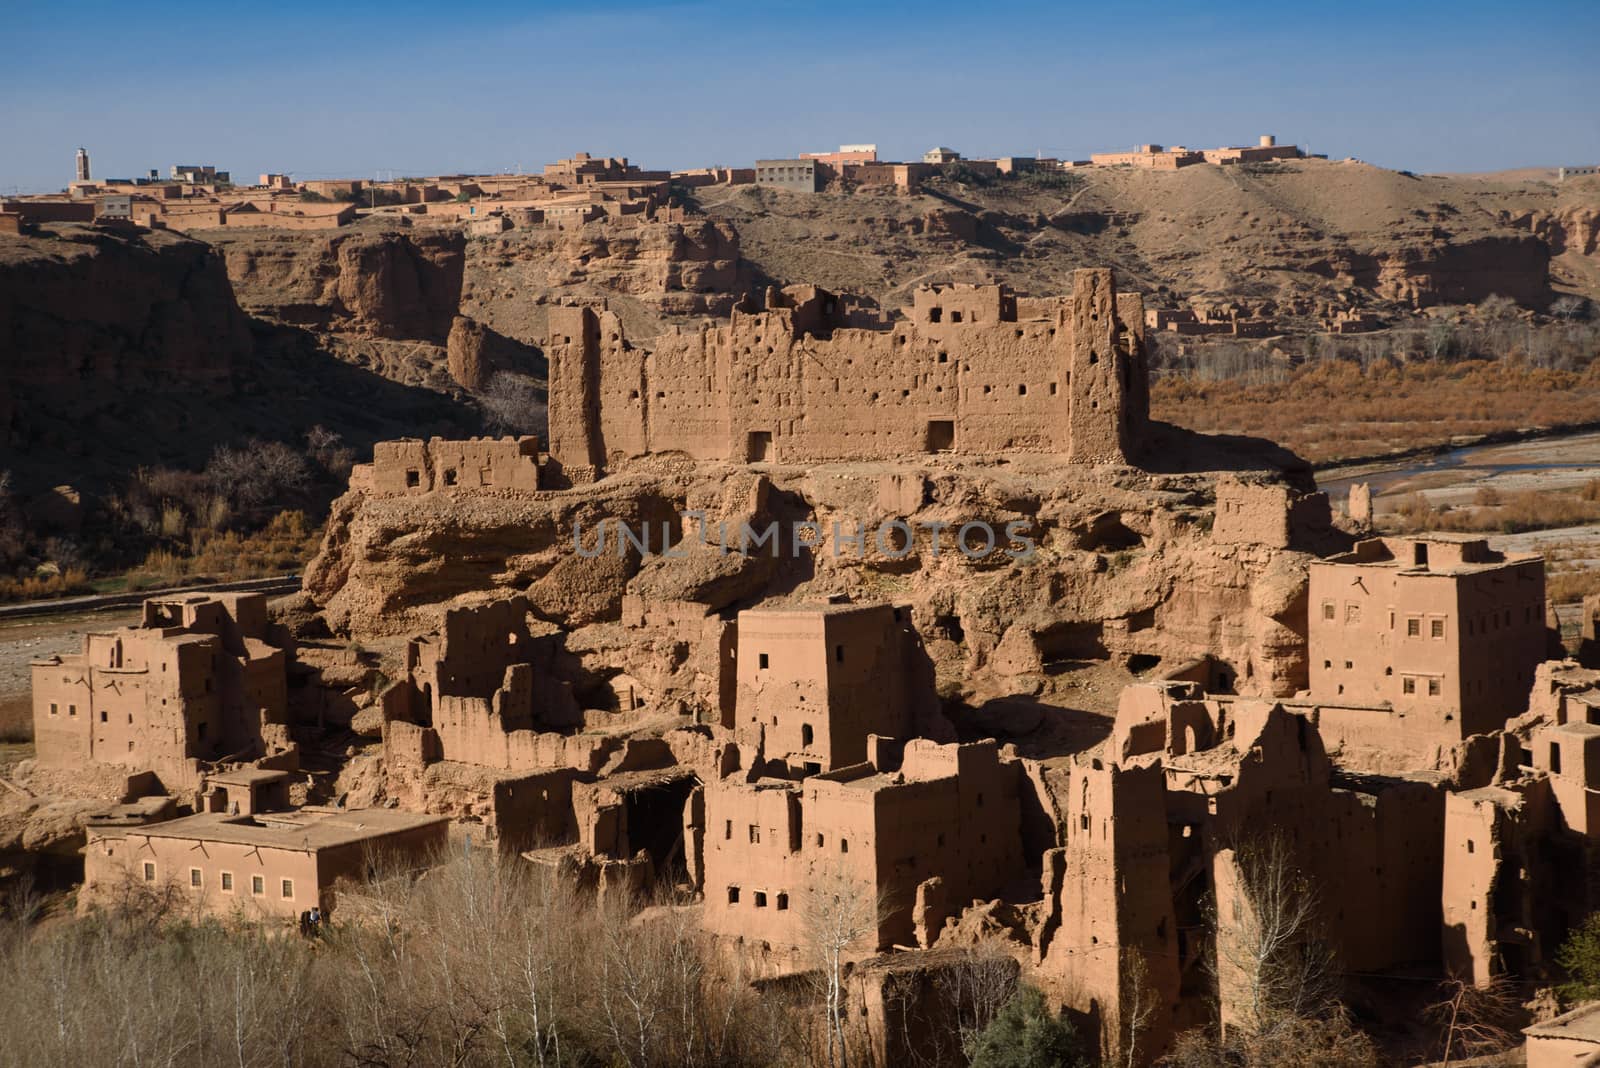 Old kasbah, Morocco, Africa. Atlas Mountains are famous for many ruins and historic kasbah.